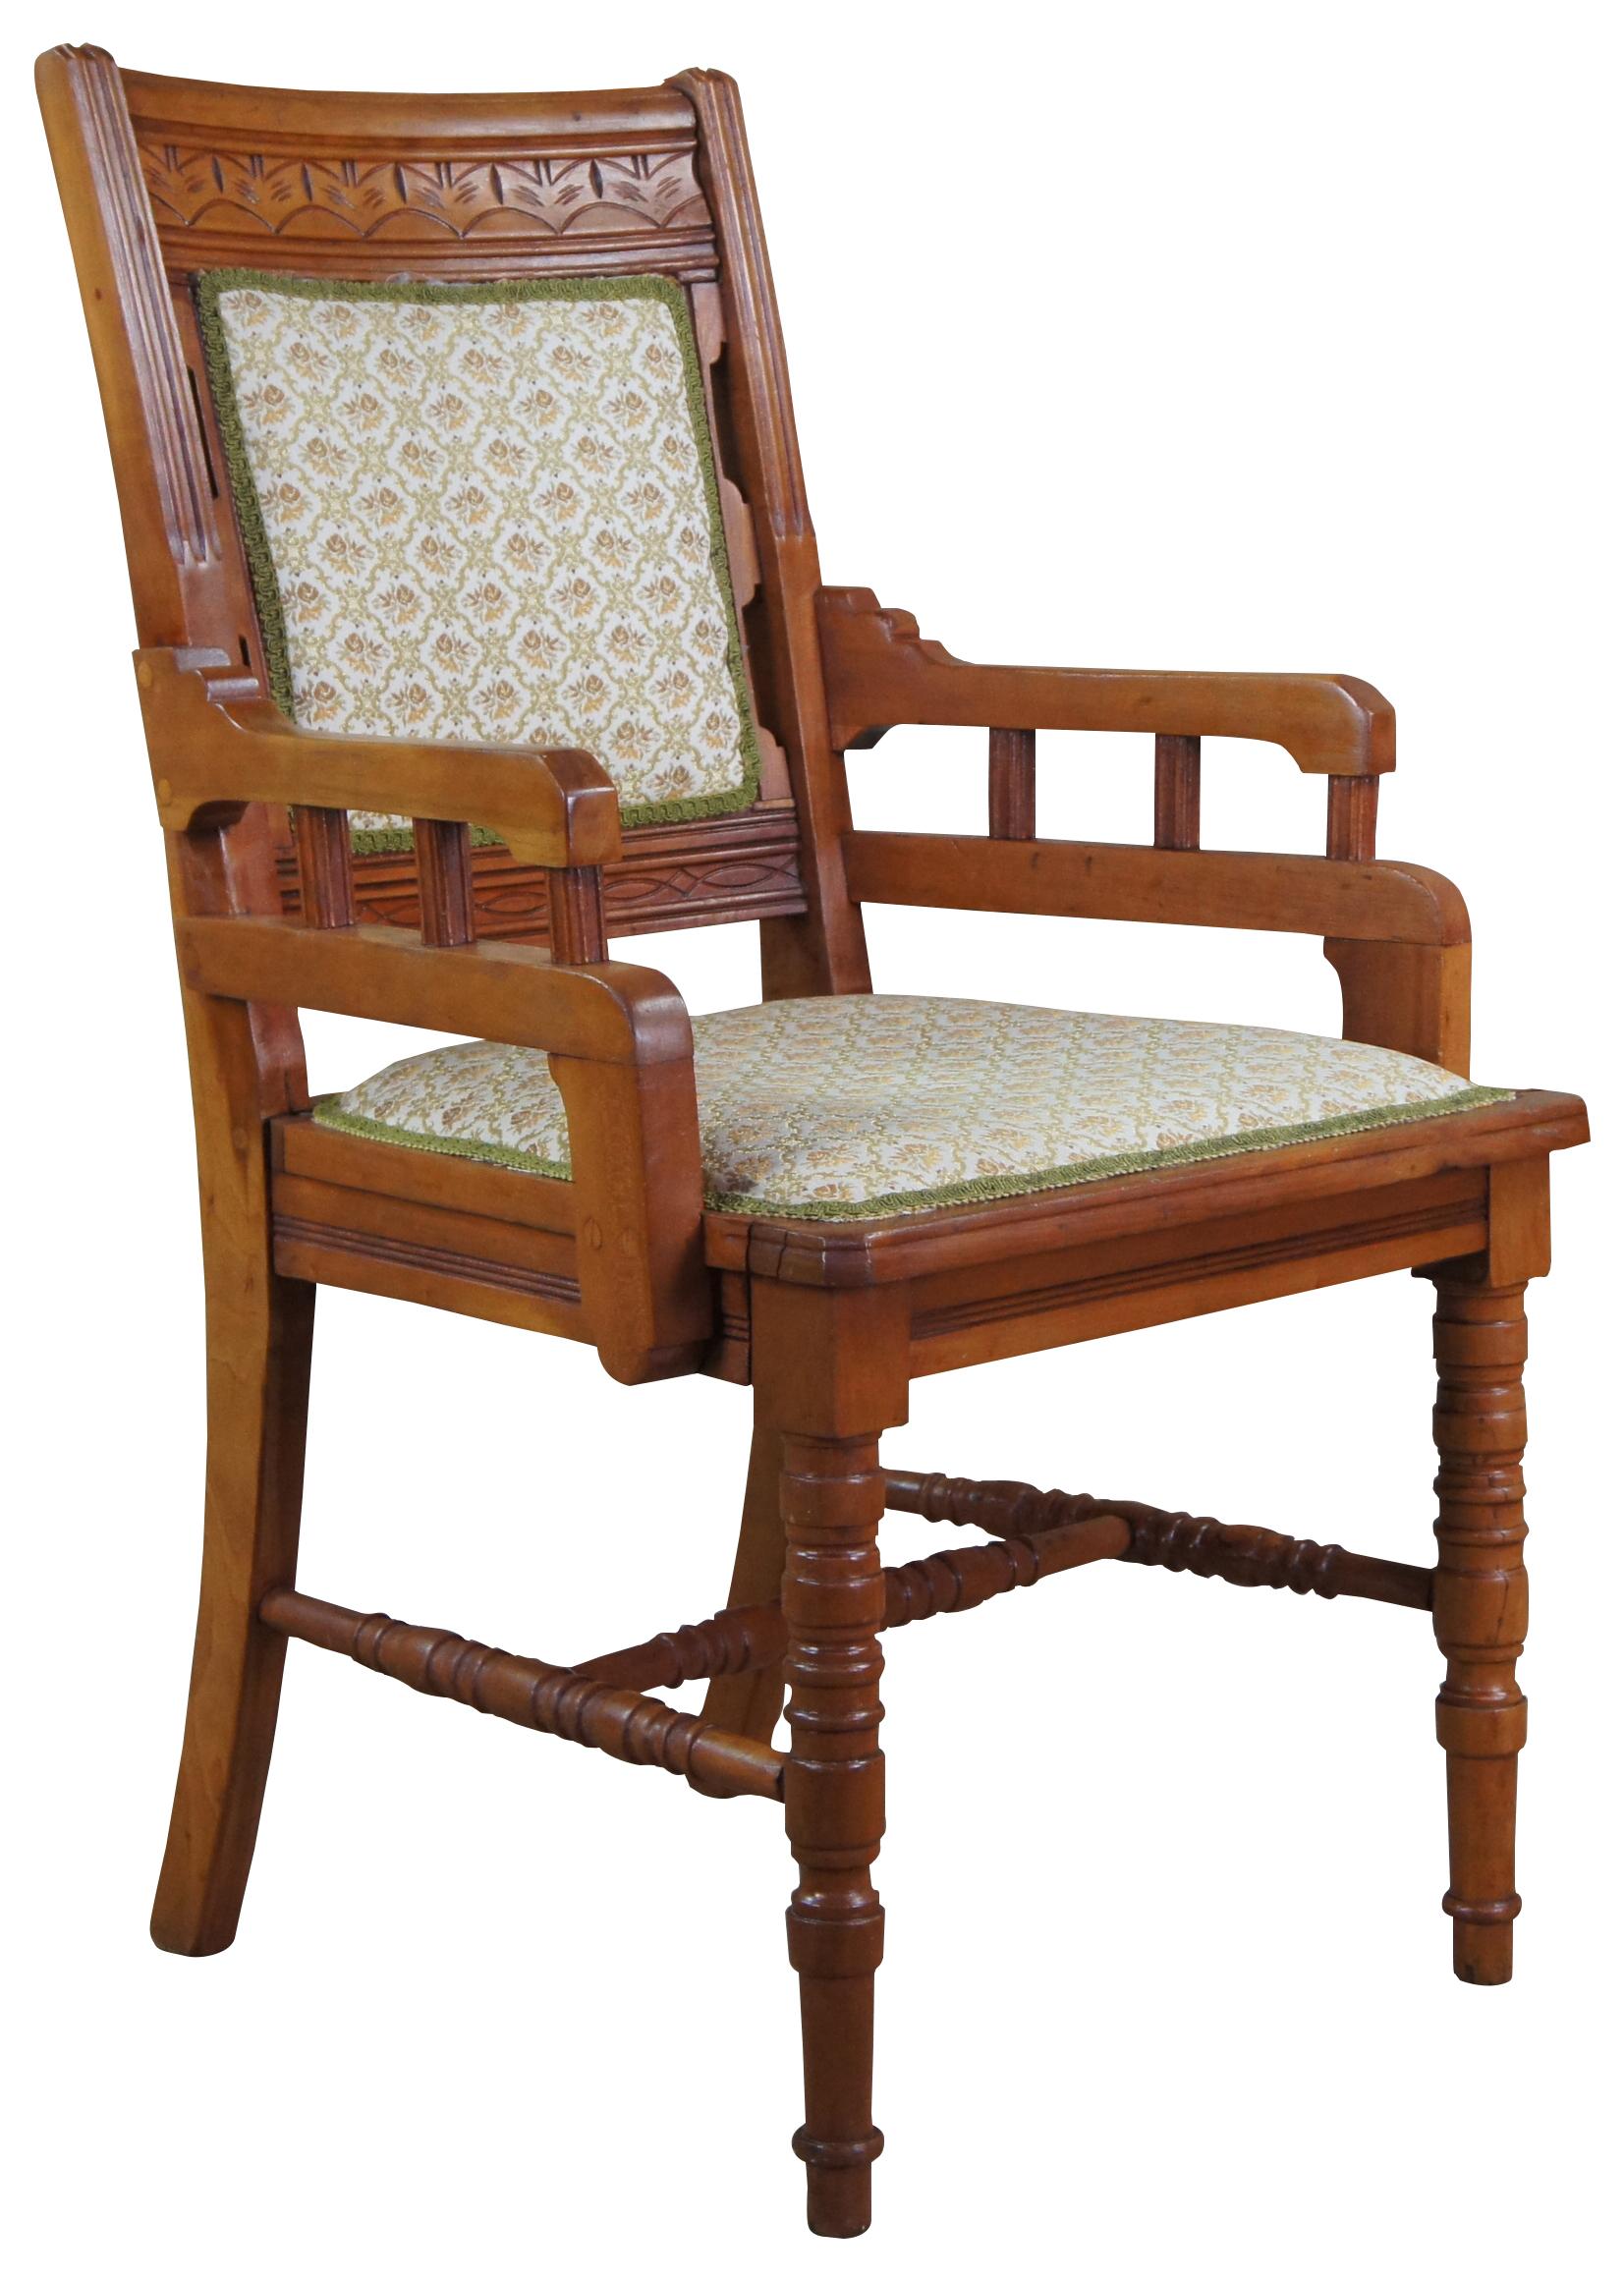 Antique 19th century Eastlake Victorian Aesthetic Movement (1870s-1890s) parlor armchair. Made of walnut featuring fluted and turned supports with upholstered seat and back.
  